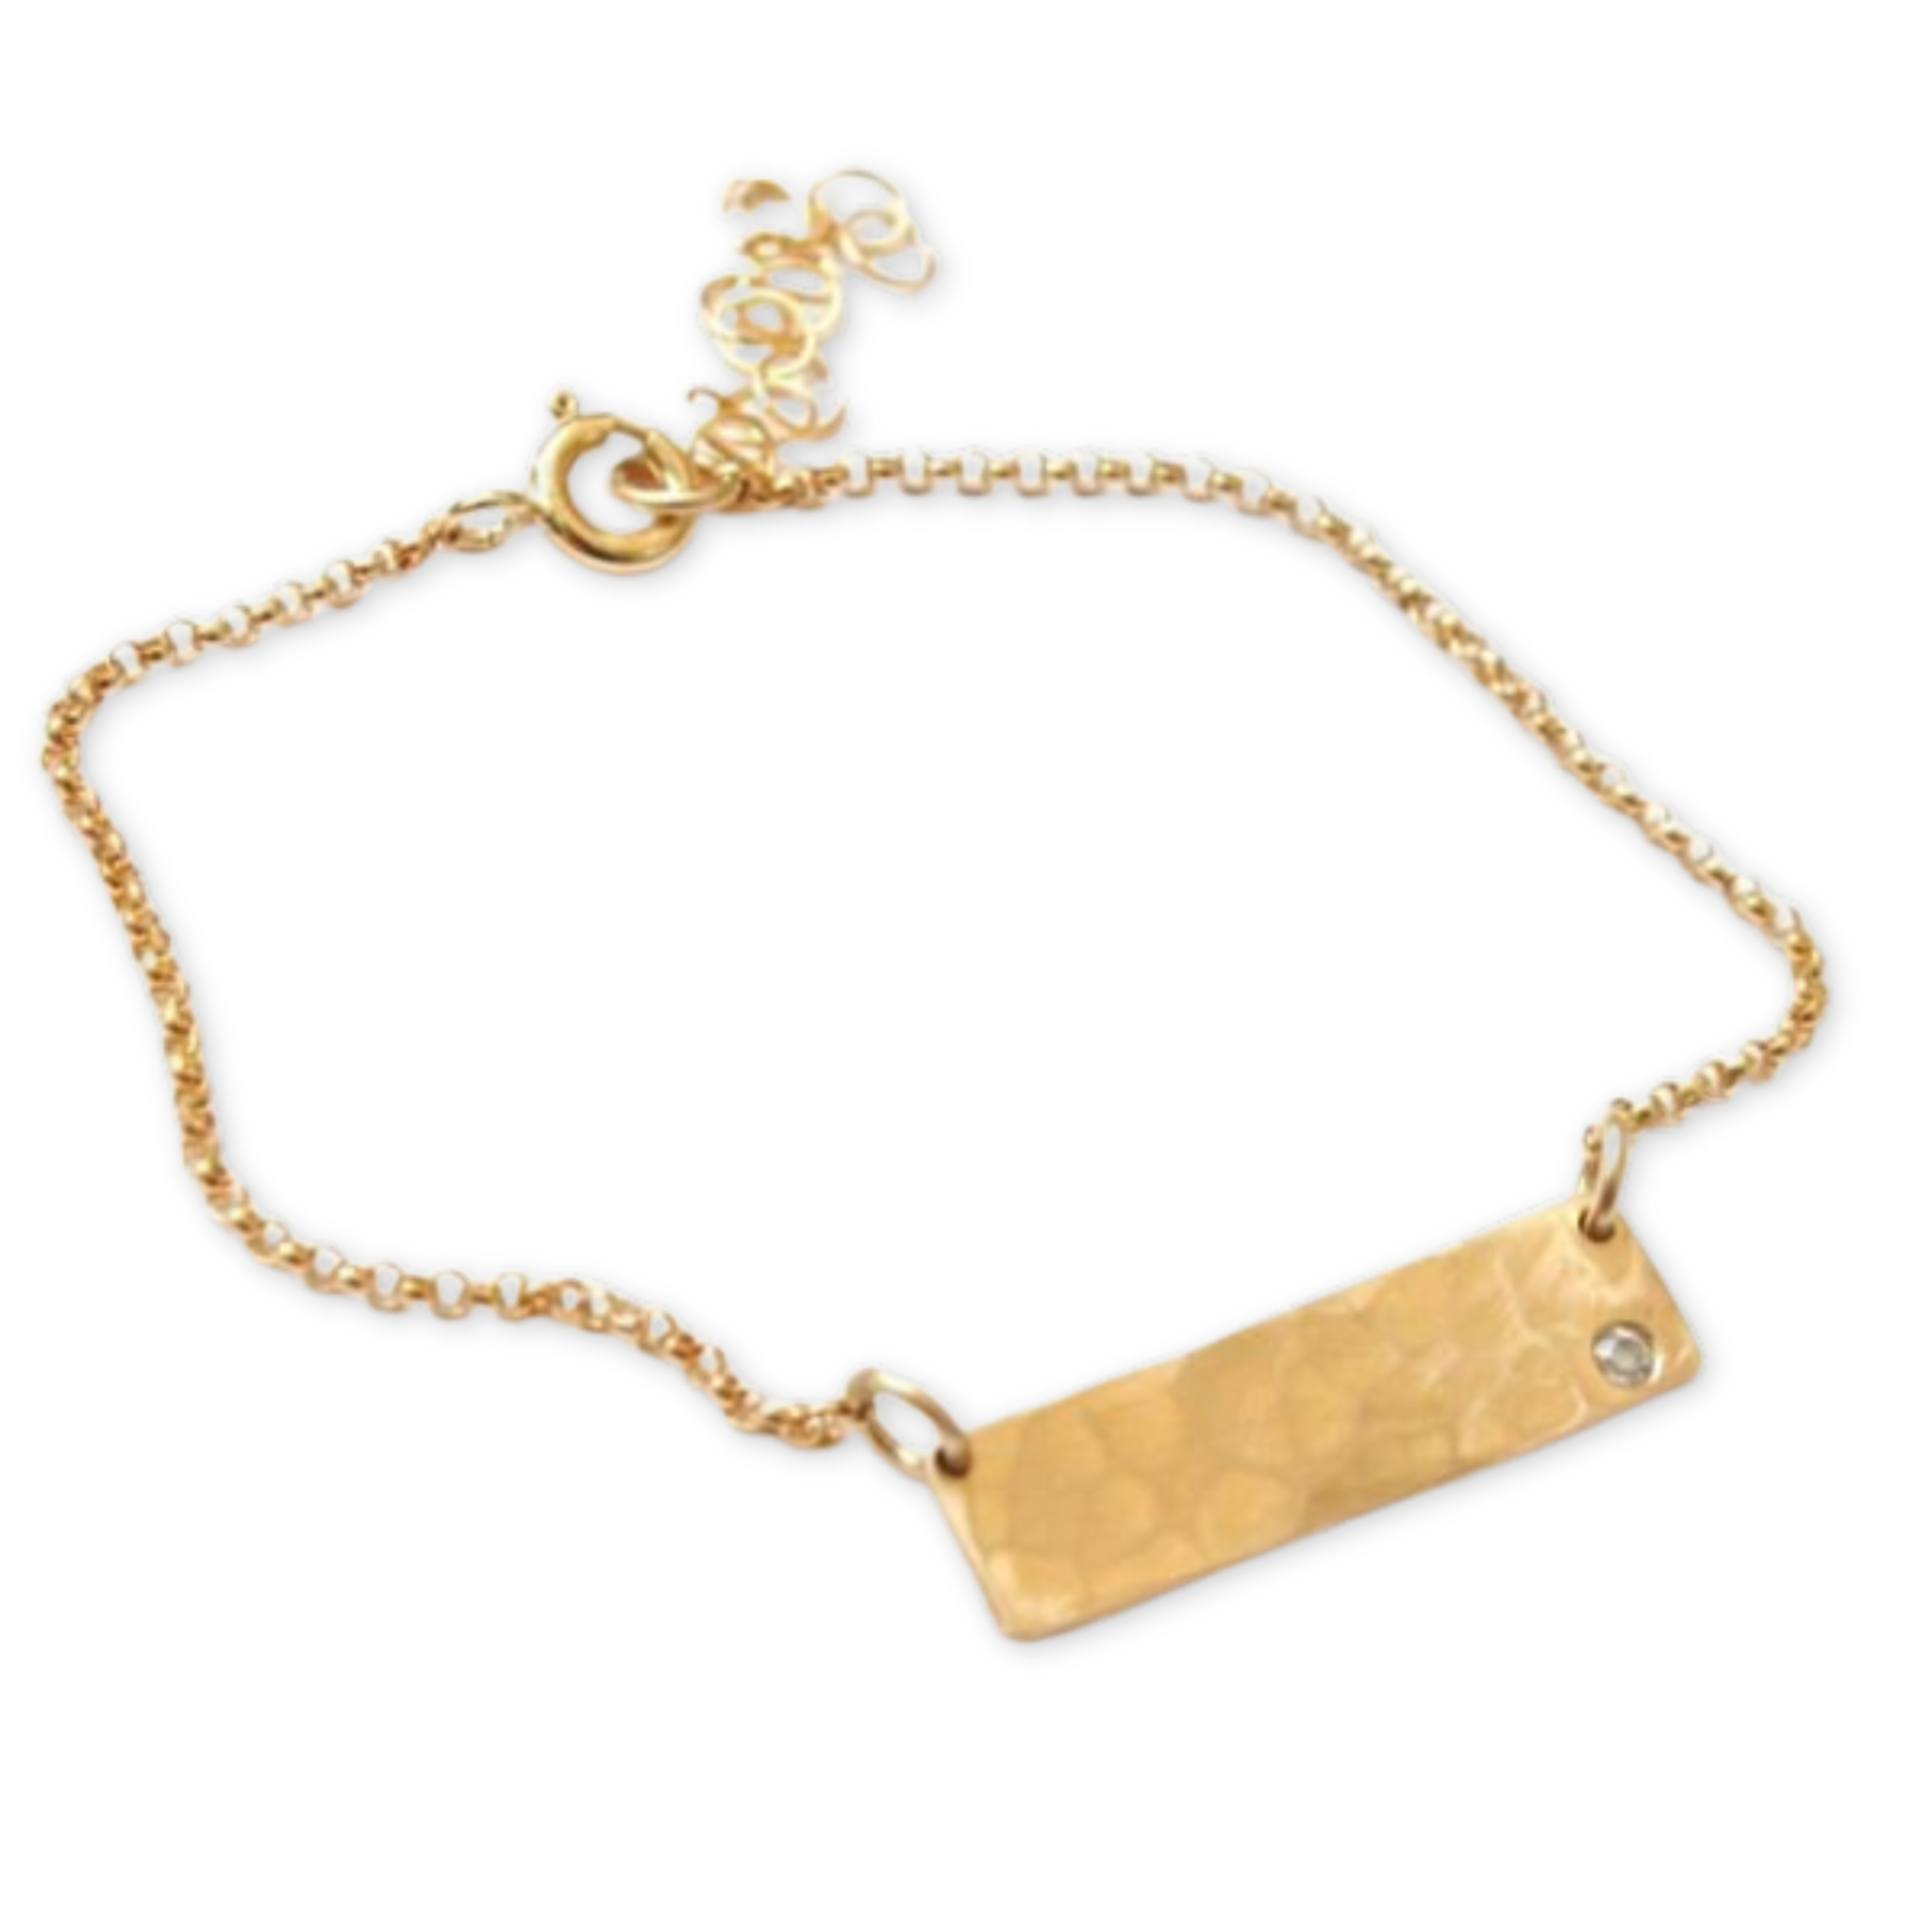 hammered rectangle pendant with a cubic zirconia stone on a thin adjustable bracelet chain